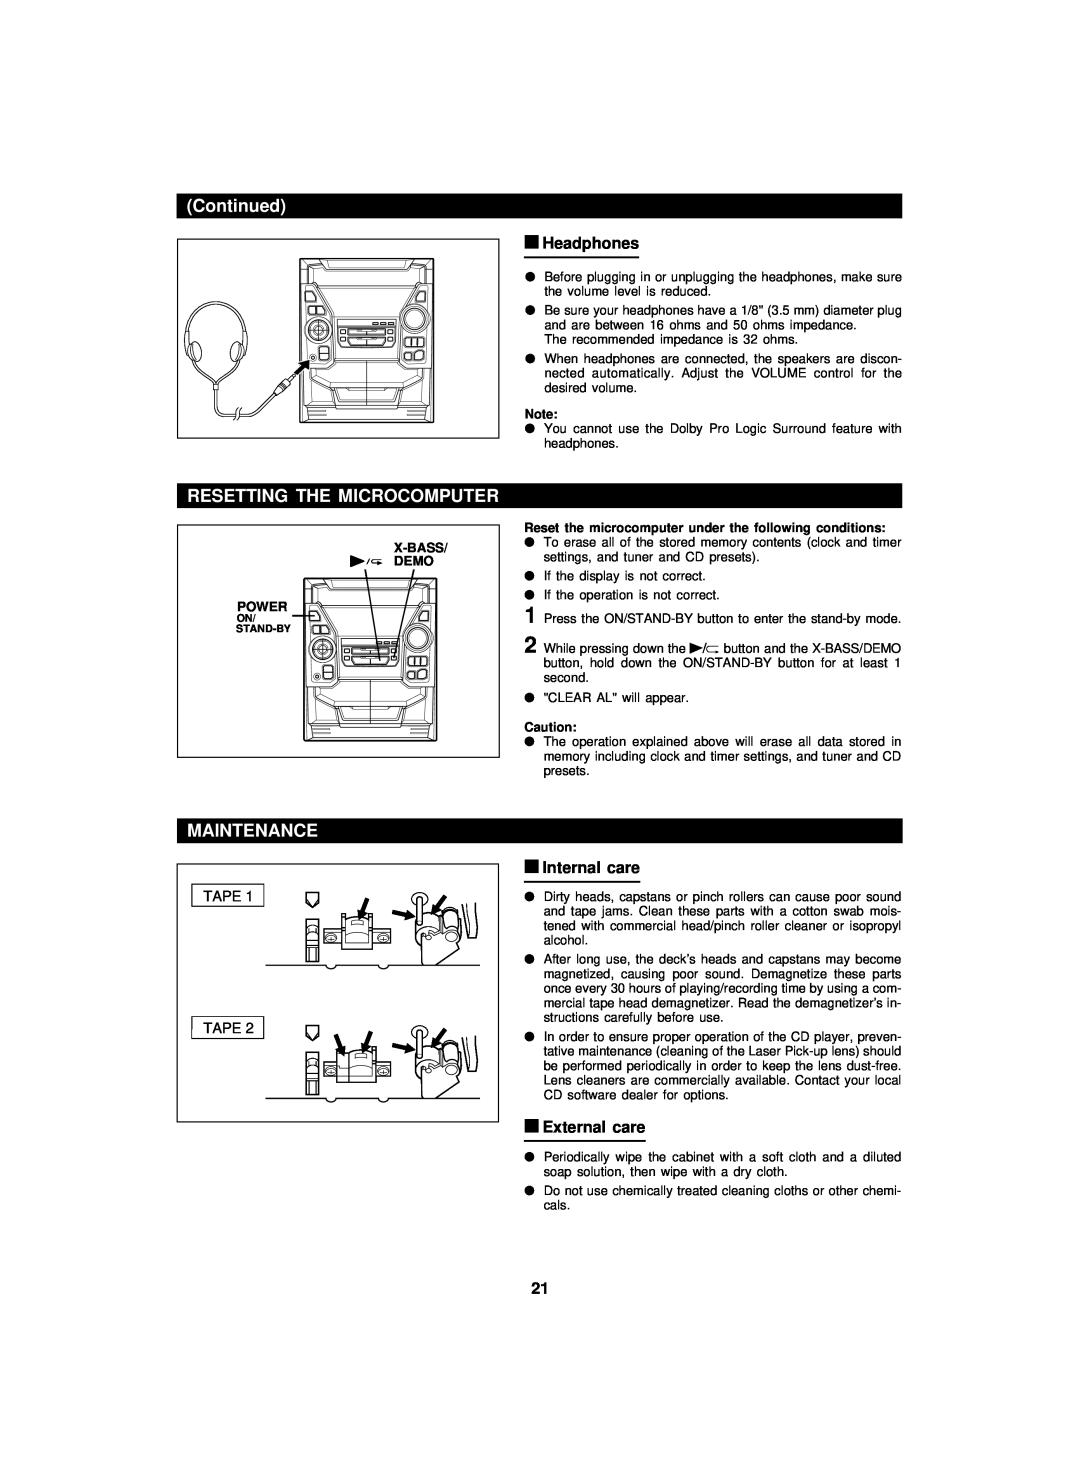 Sharp CDPC3500 operation manual Resetting The Microcomputer, Continued, Maintenance, Tape 